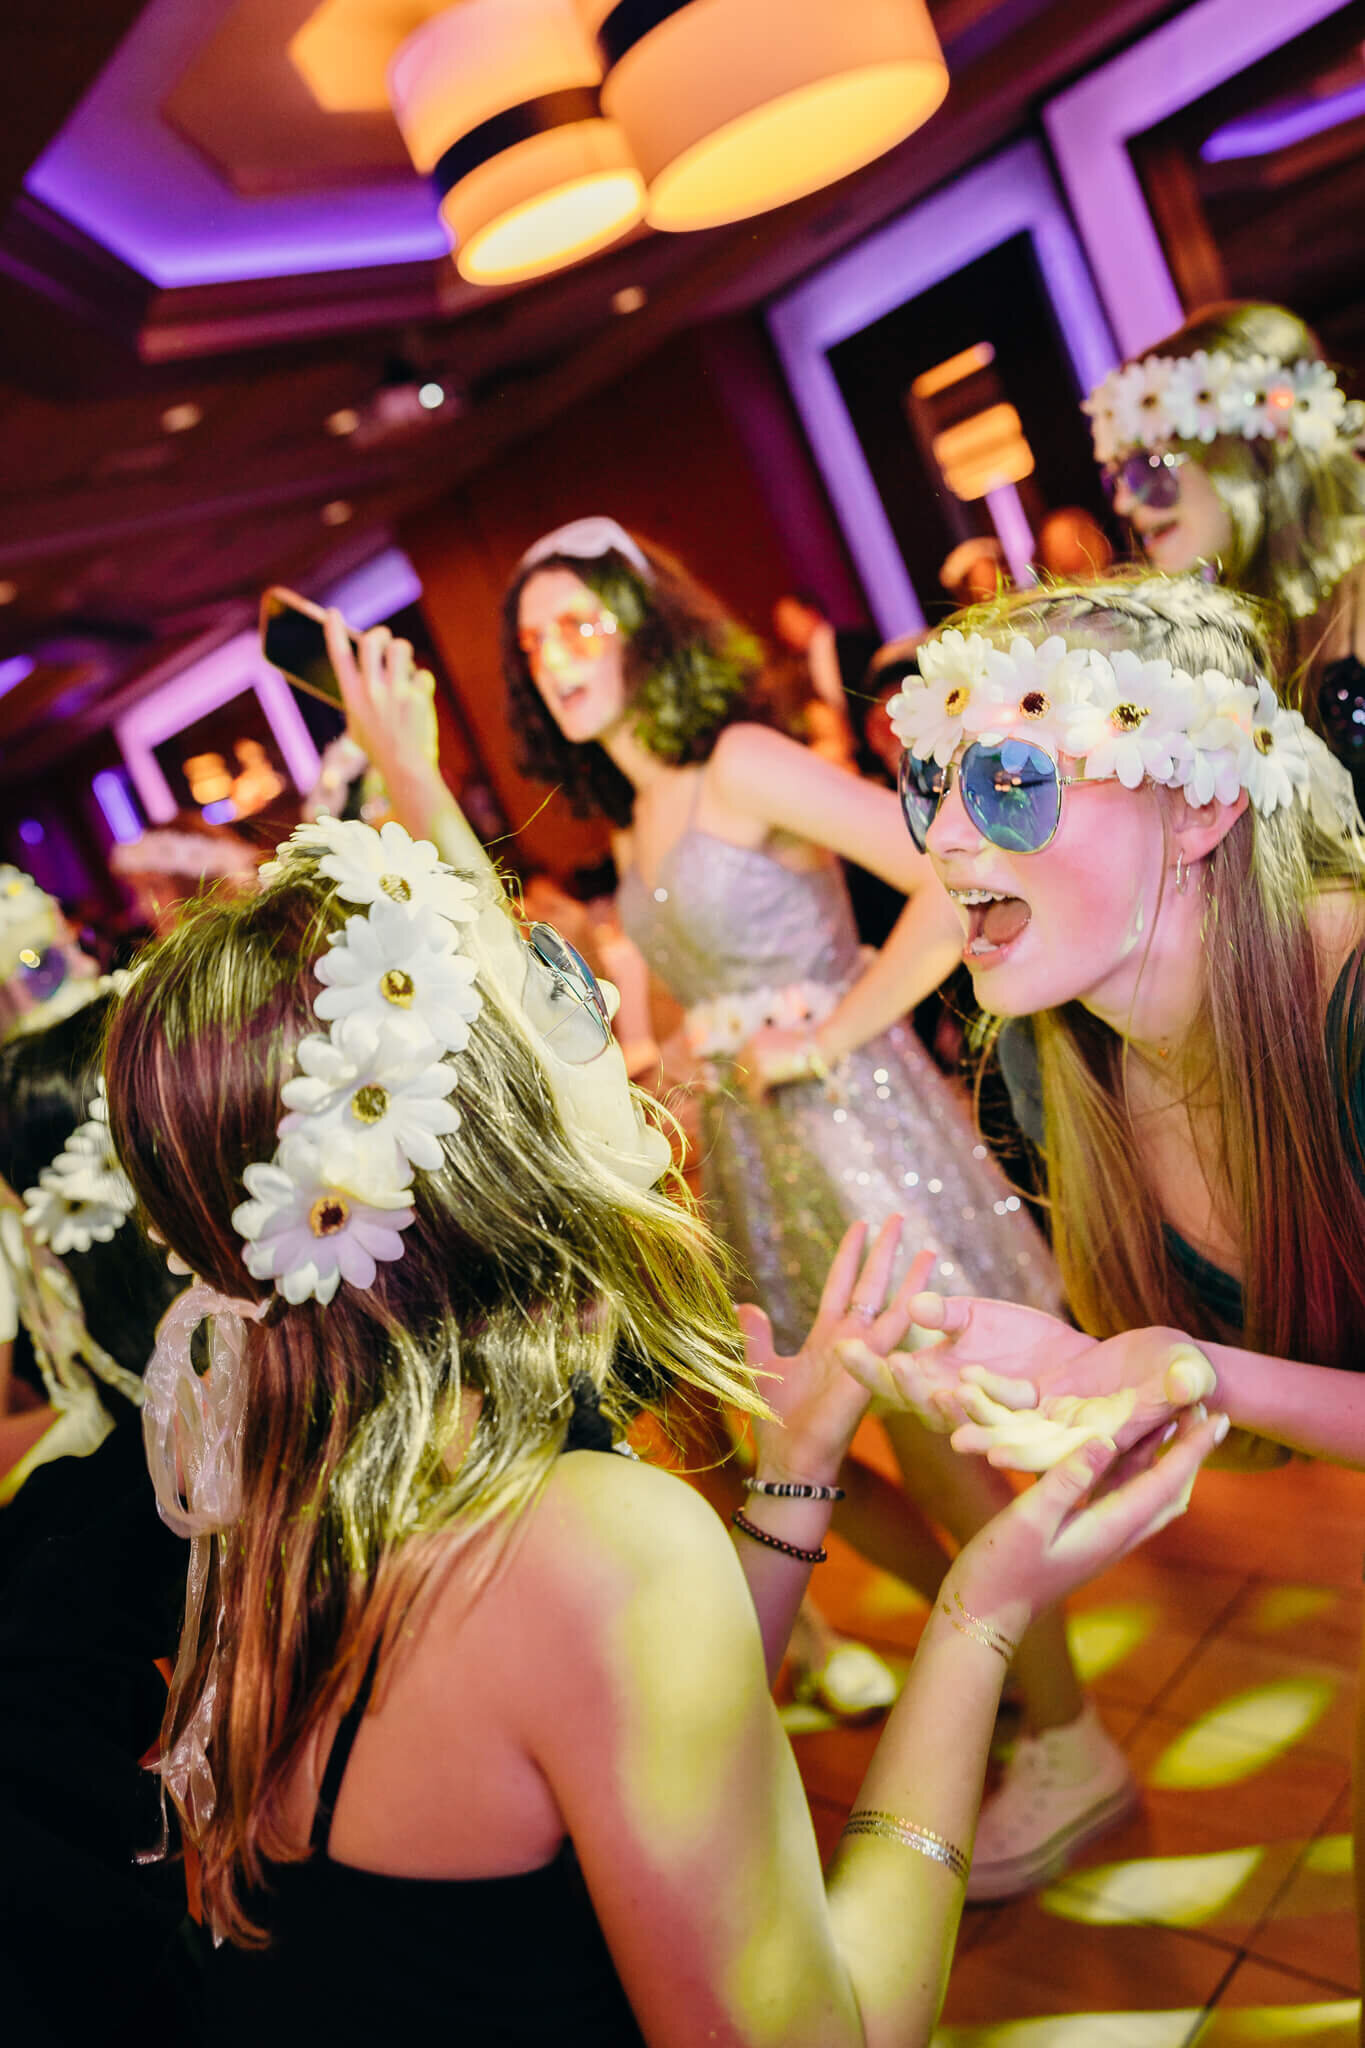 Teenage girls dance and play in blue glasses and flower headbands on the dance floor